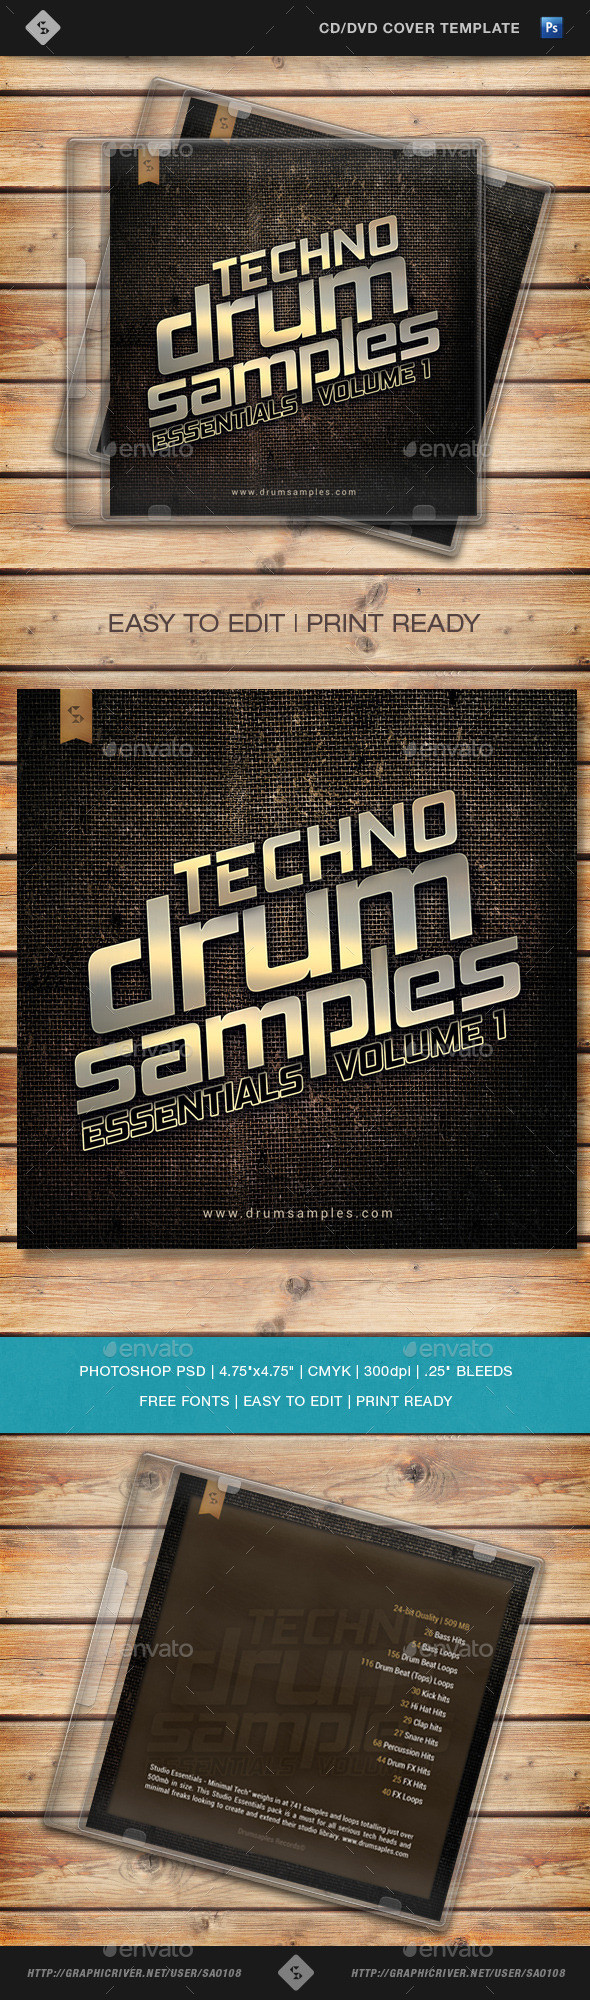 Techno drum samples cd cover preview